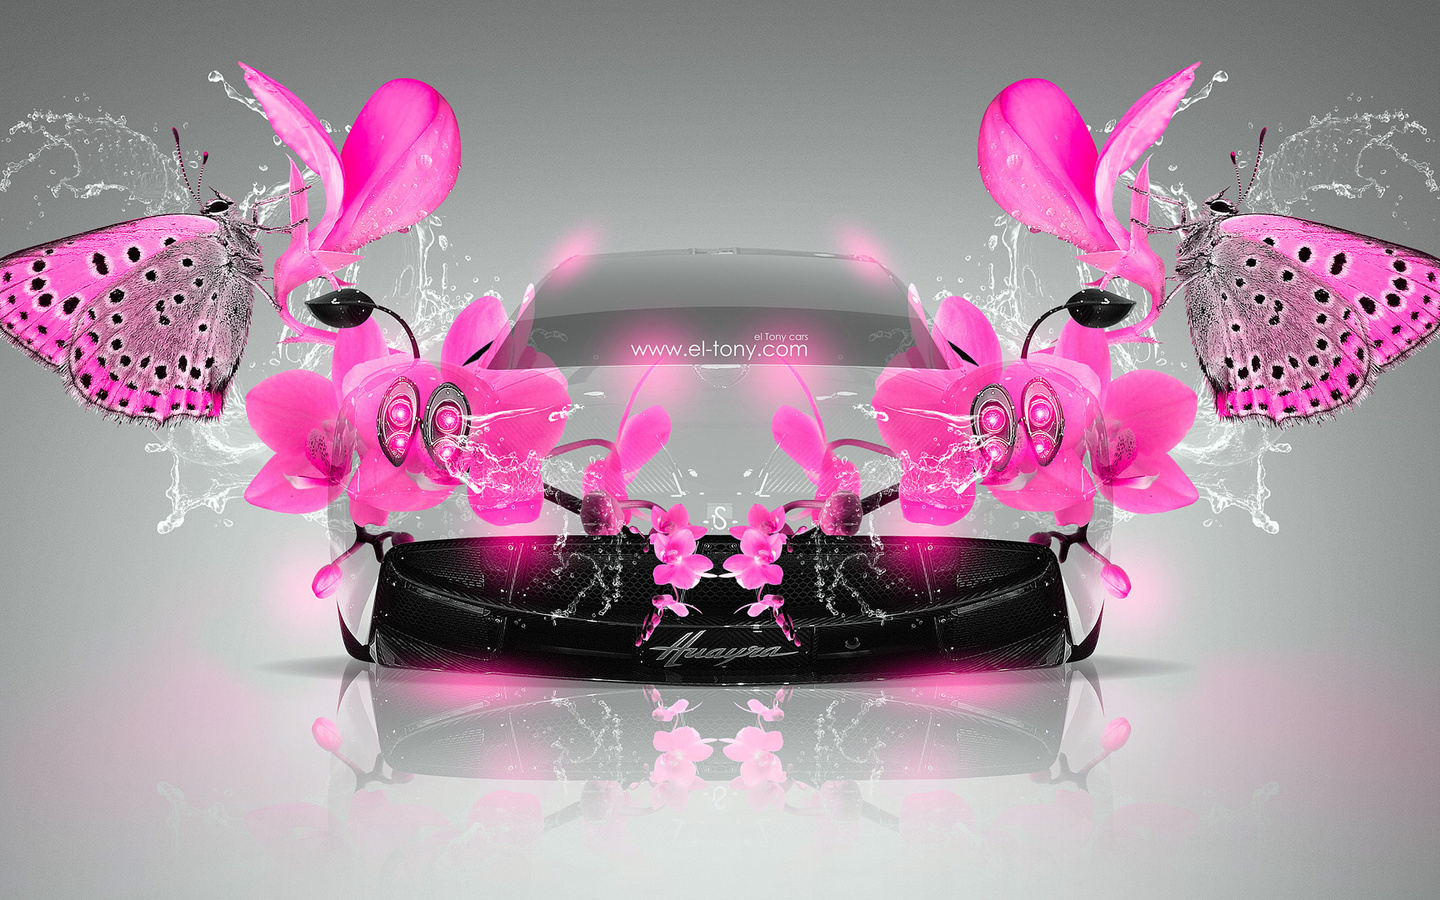 tony kokhan, pagani, huayra, fantasy, flowers, butterfly, water, pink, colors, glamour, el tony cars, photoshop, design, art,  , , , , , , , , , , , , , , , 